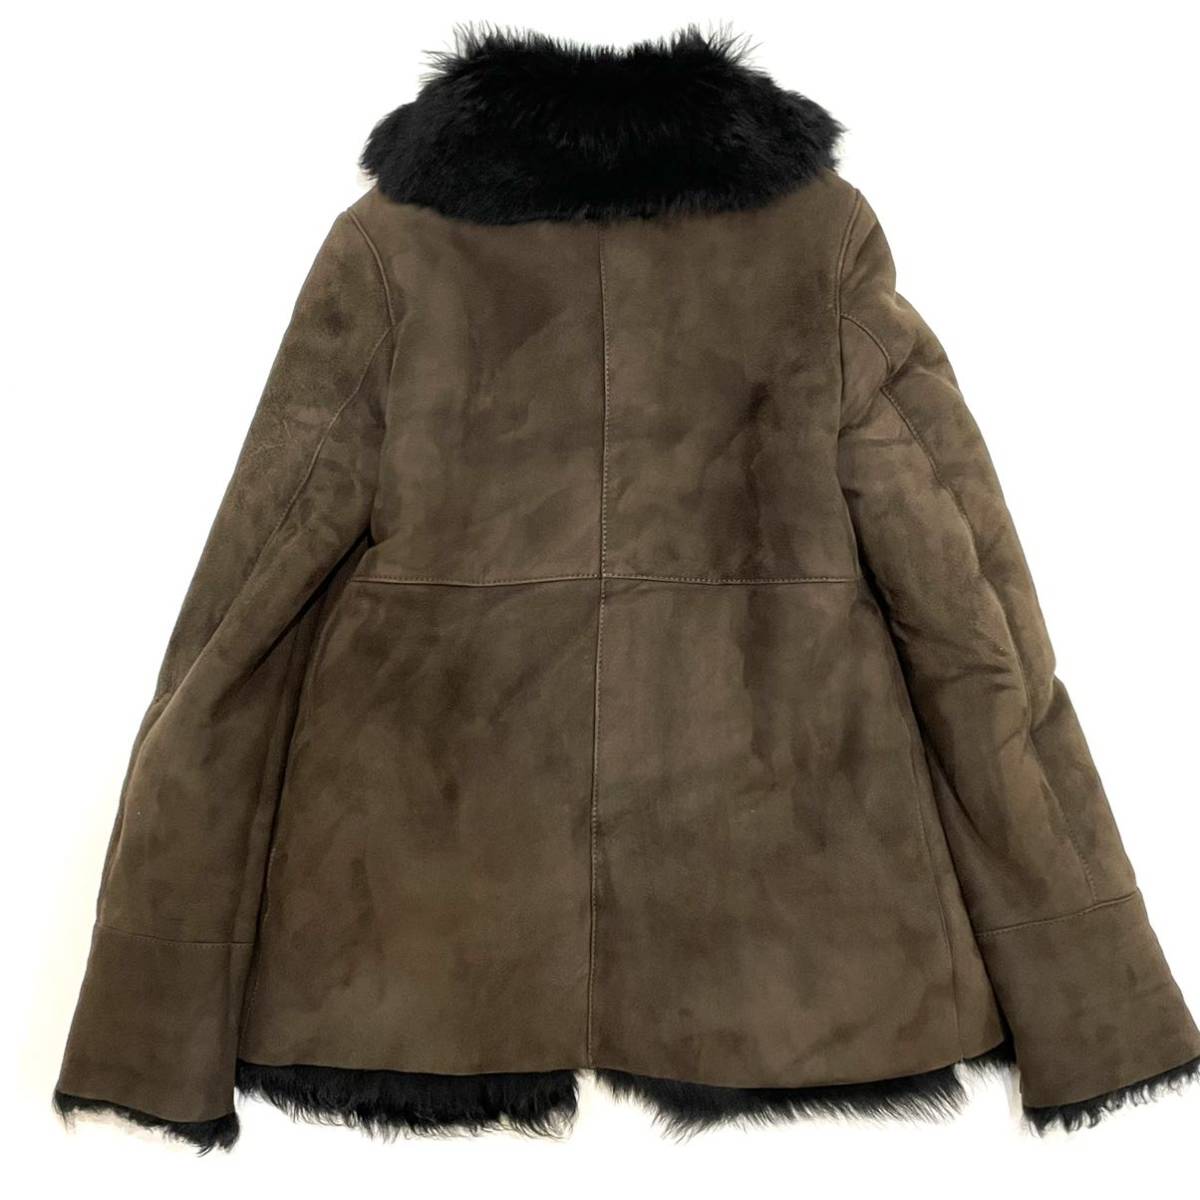  superior article!! Italy made GELLI Jerry sheep leather sheepskin mouton high class half coat (40) lady's Brown 